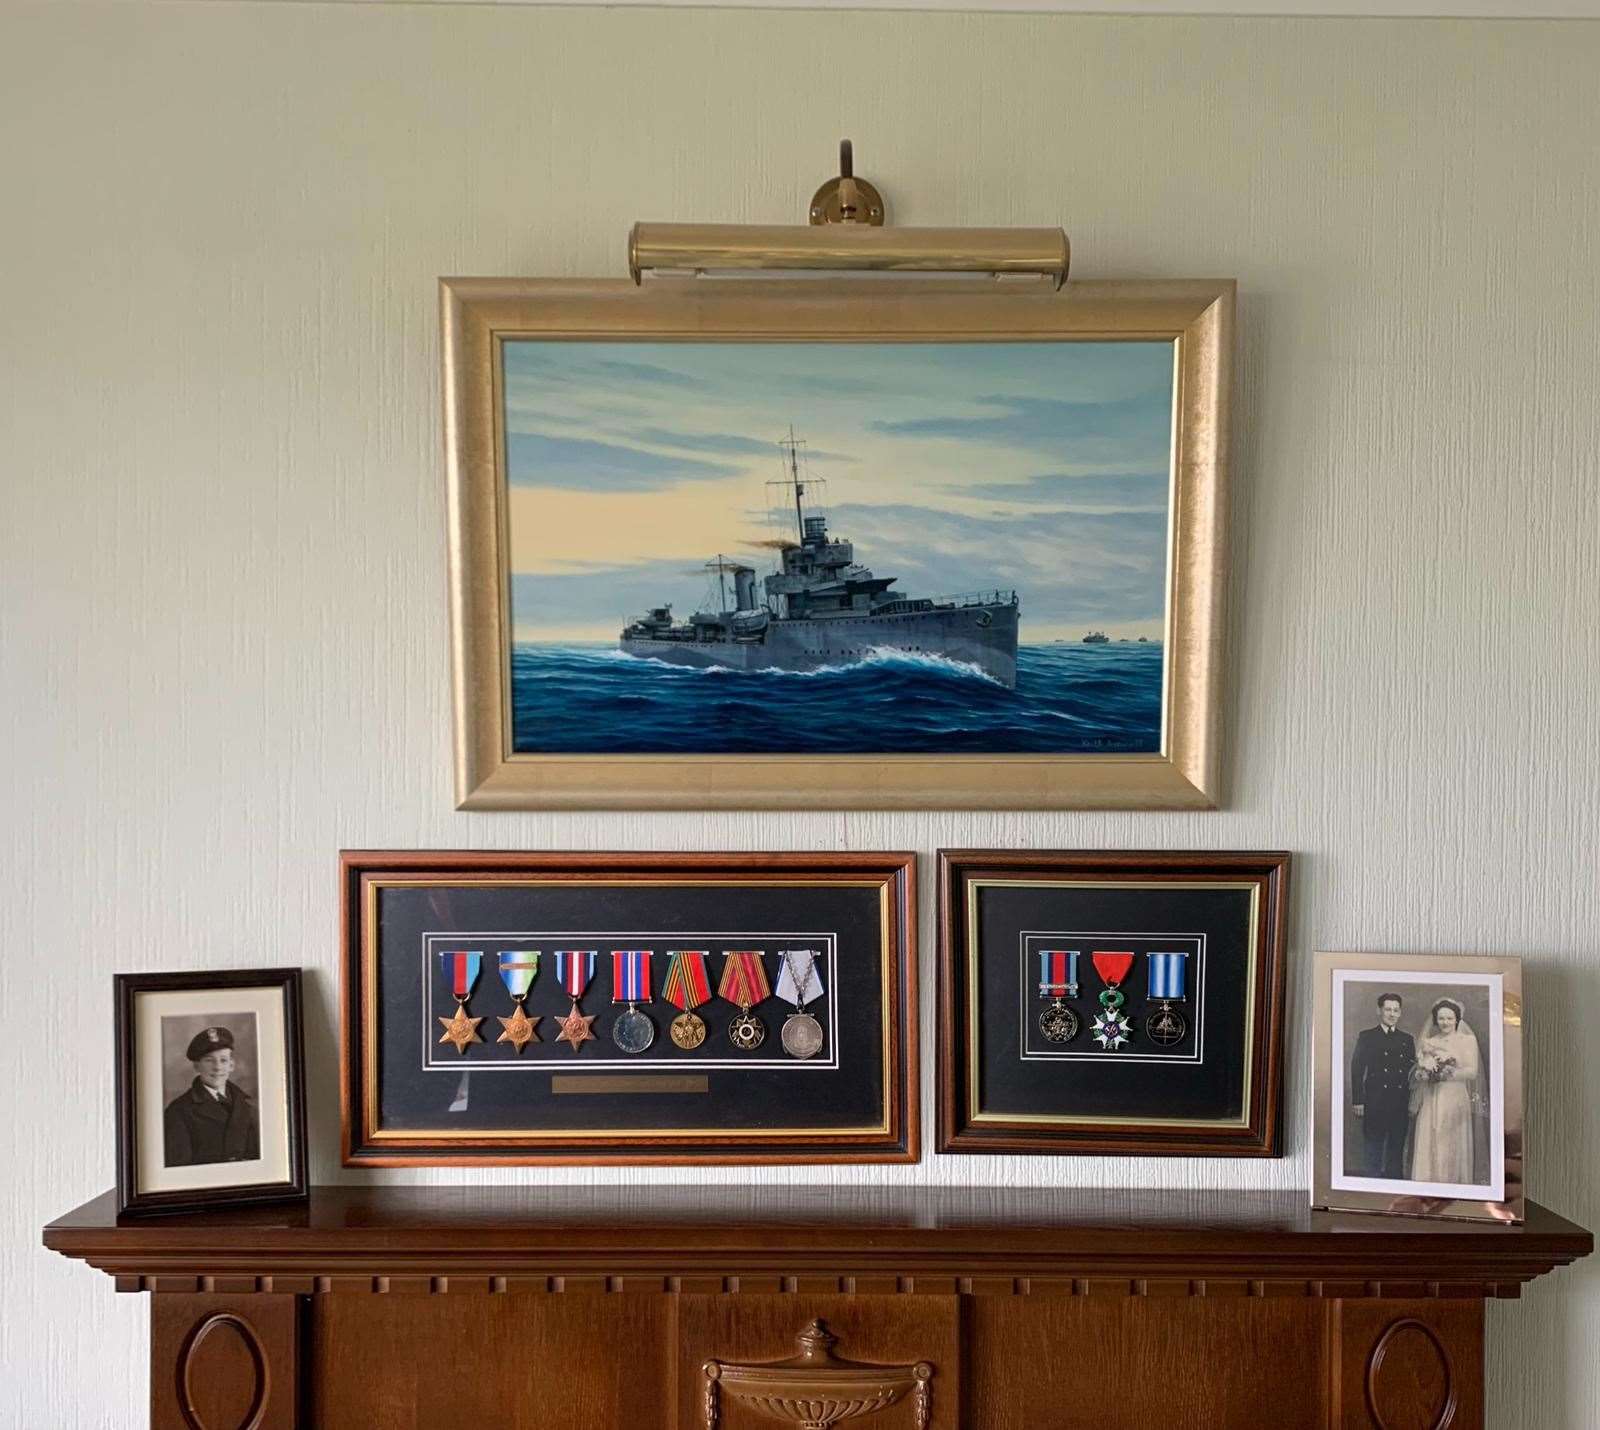 Cyril keeps his medals on display along with pictures pictures and a painting of a Royal Navy destroyer